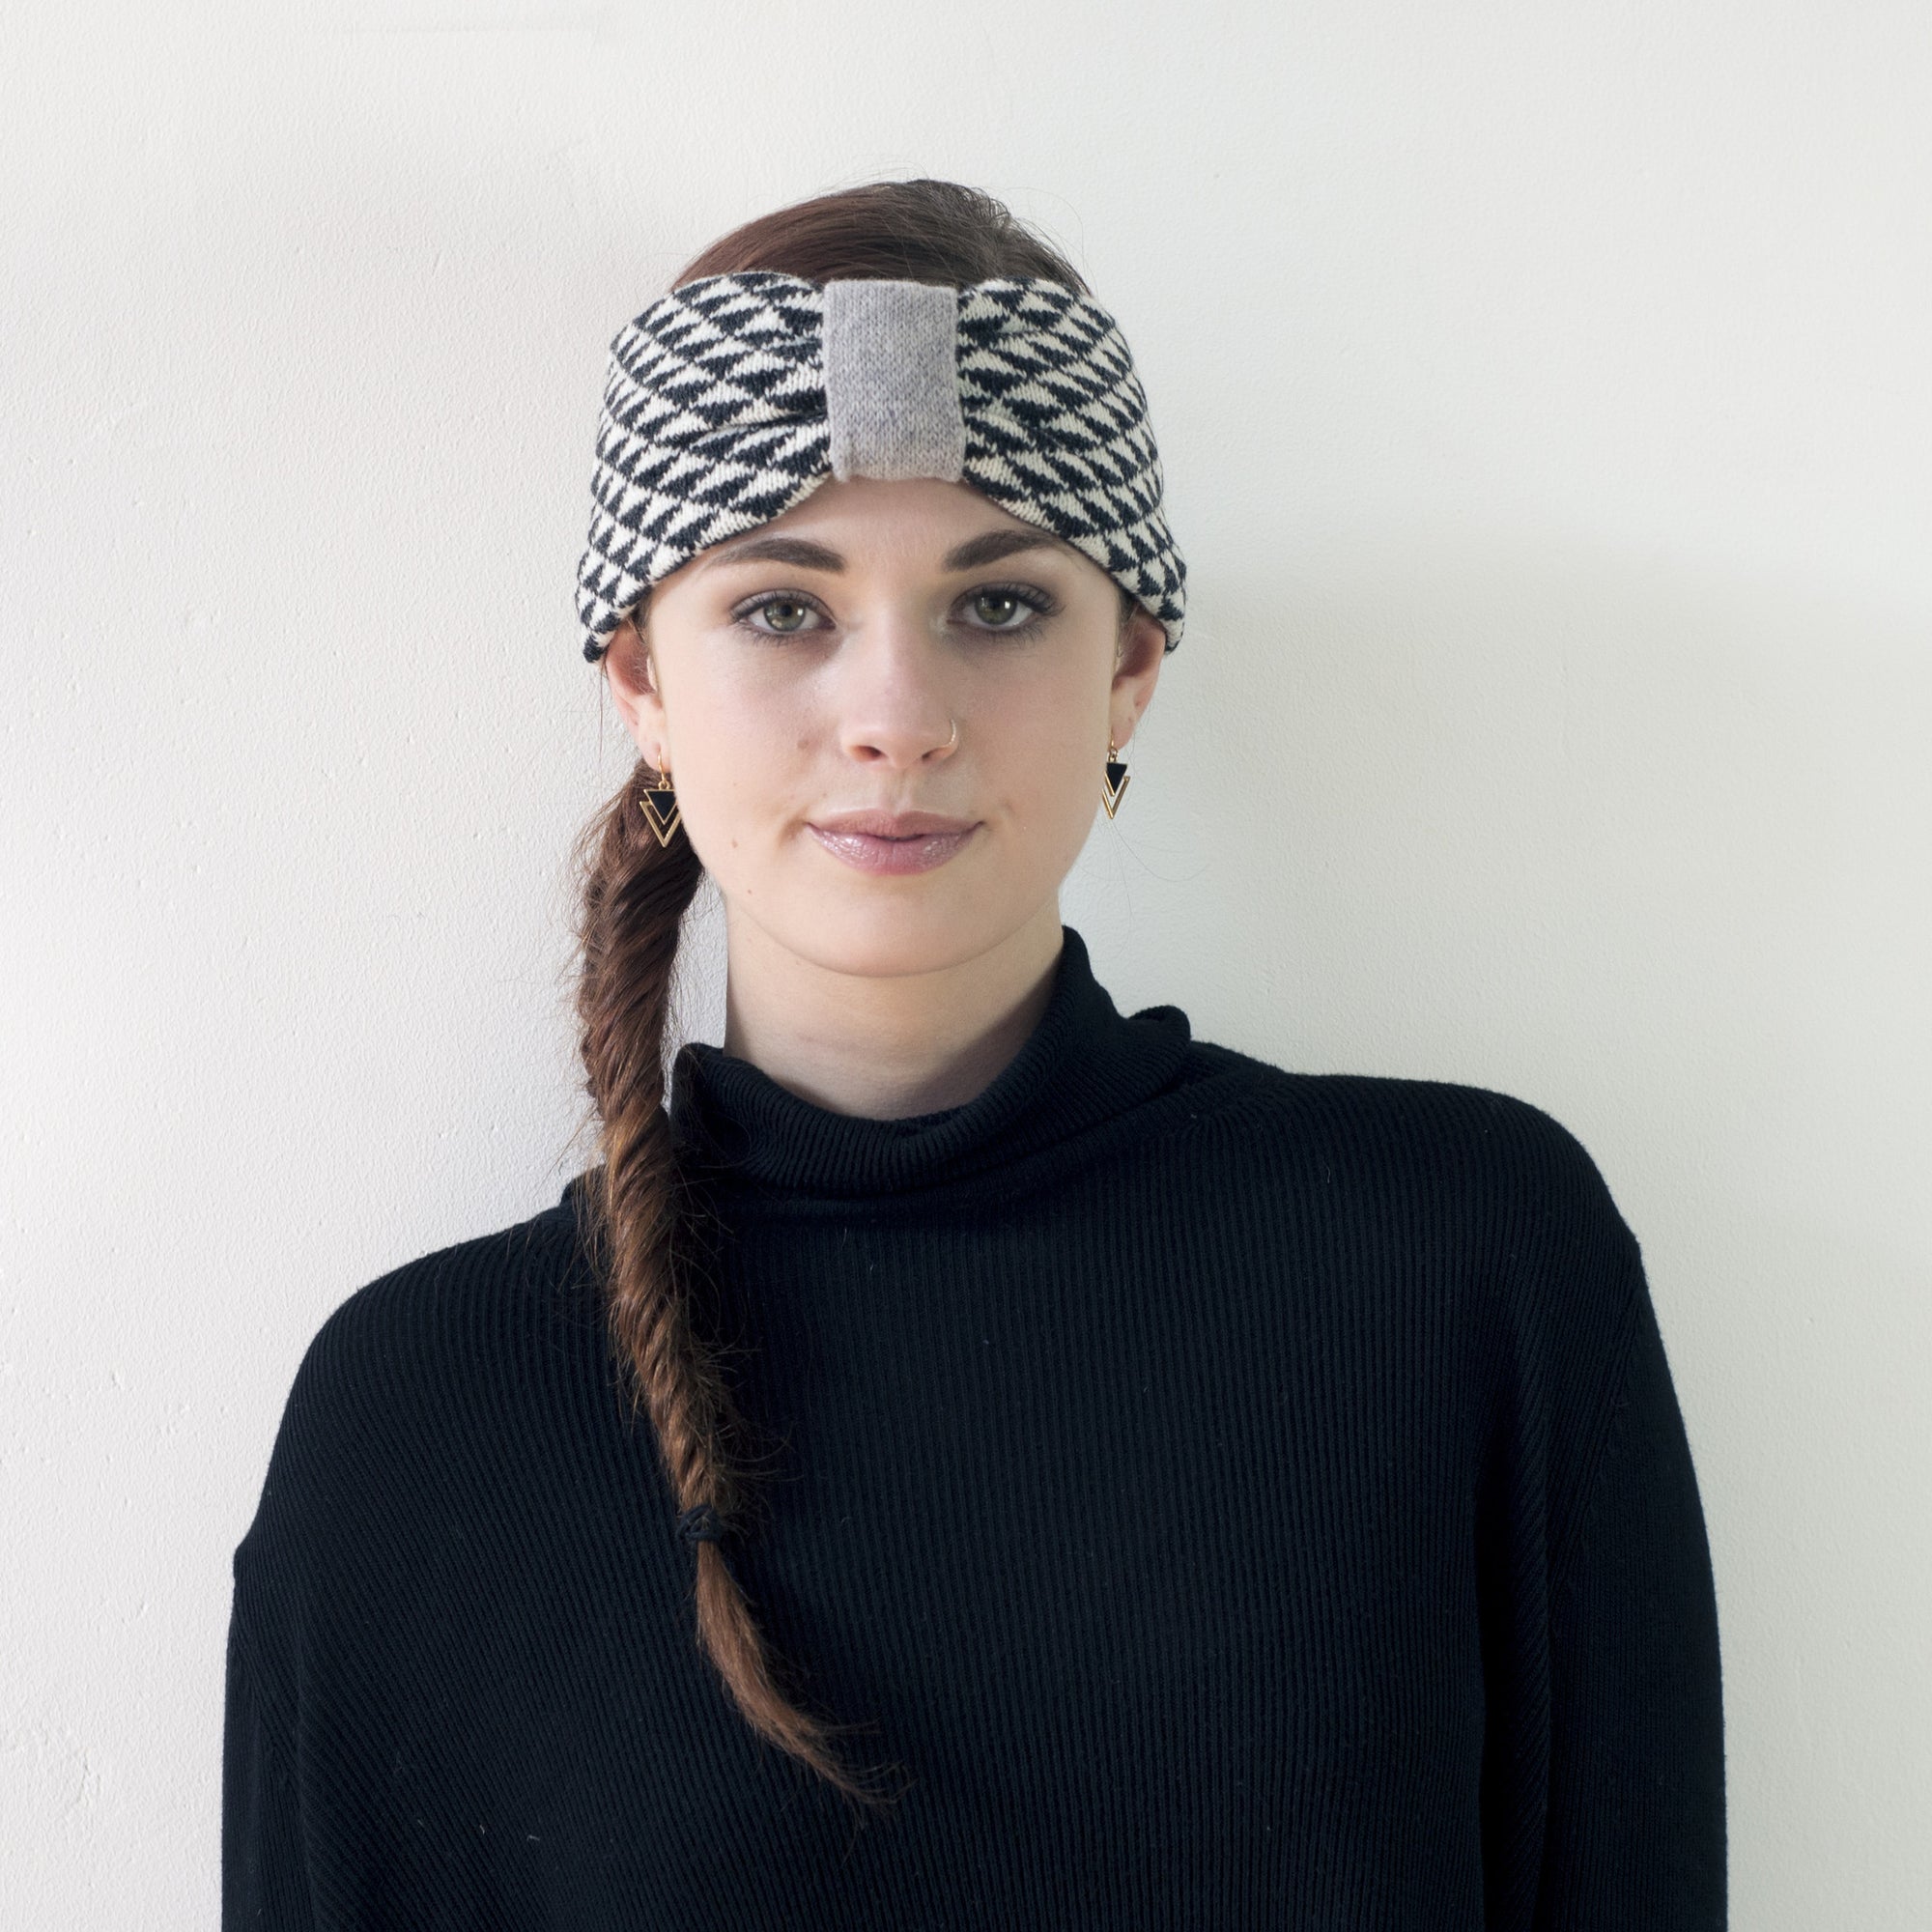 Triangle knitted headband - monochrome (MADE TO ORDER)